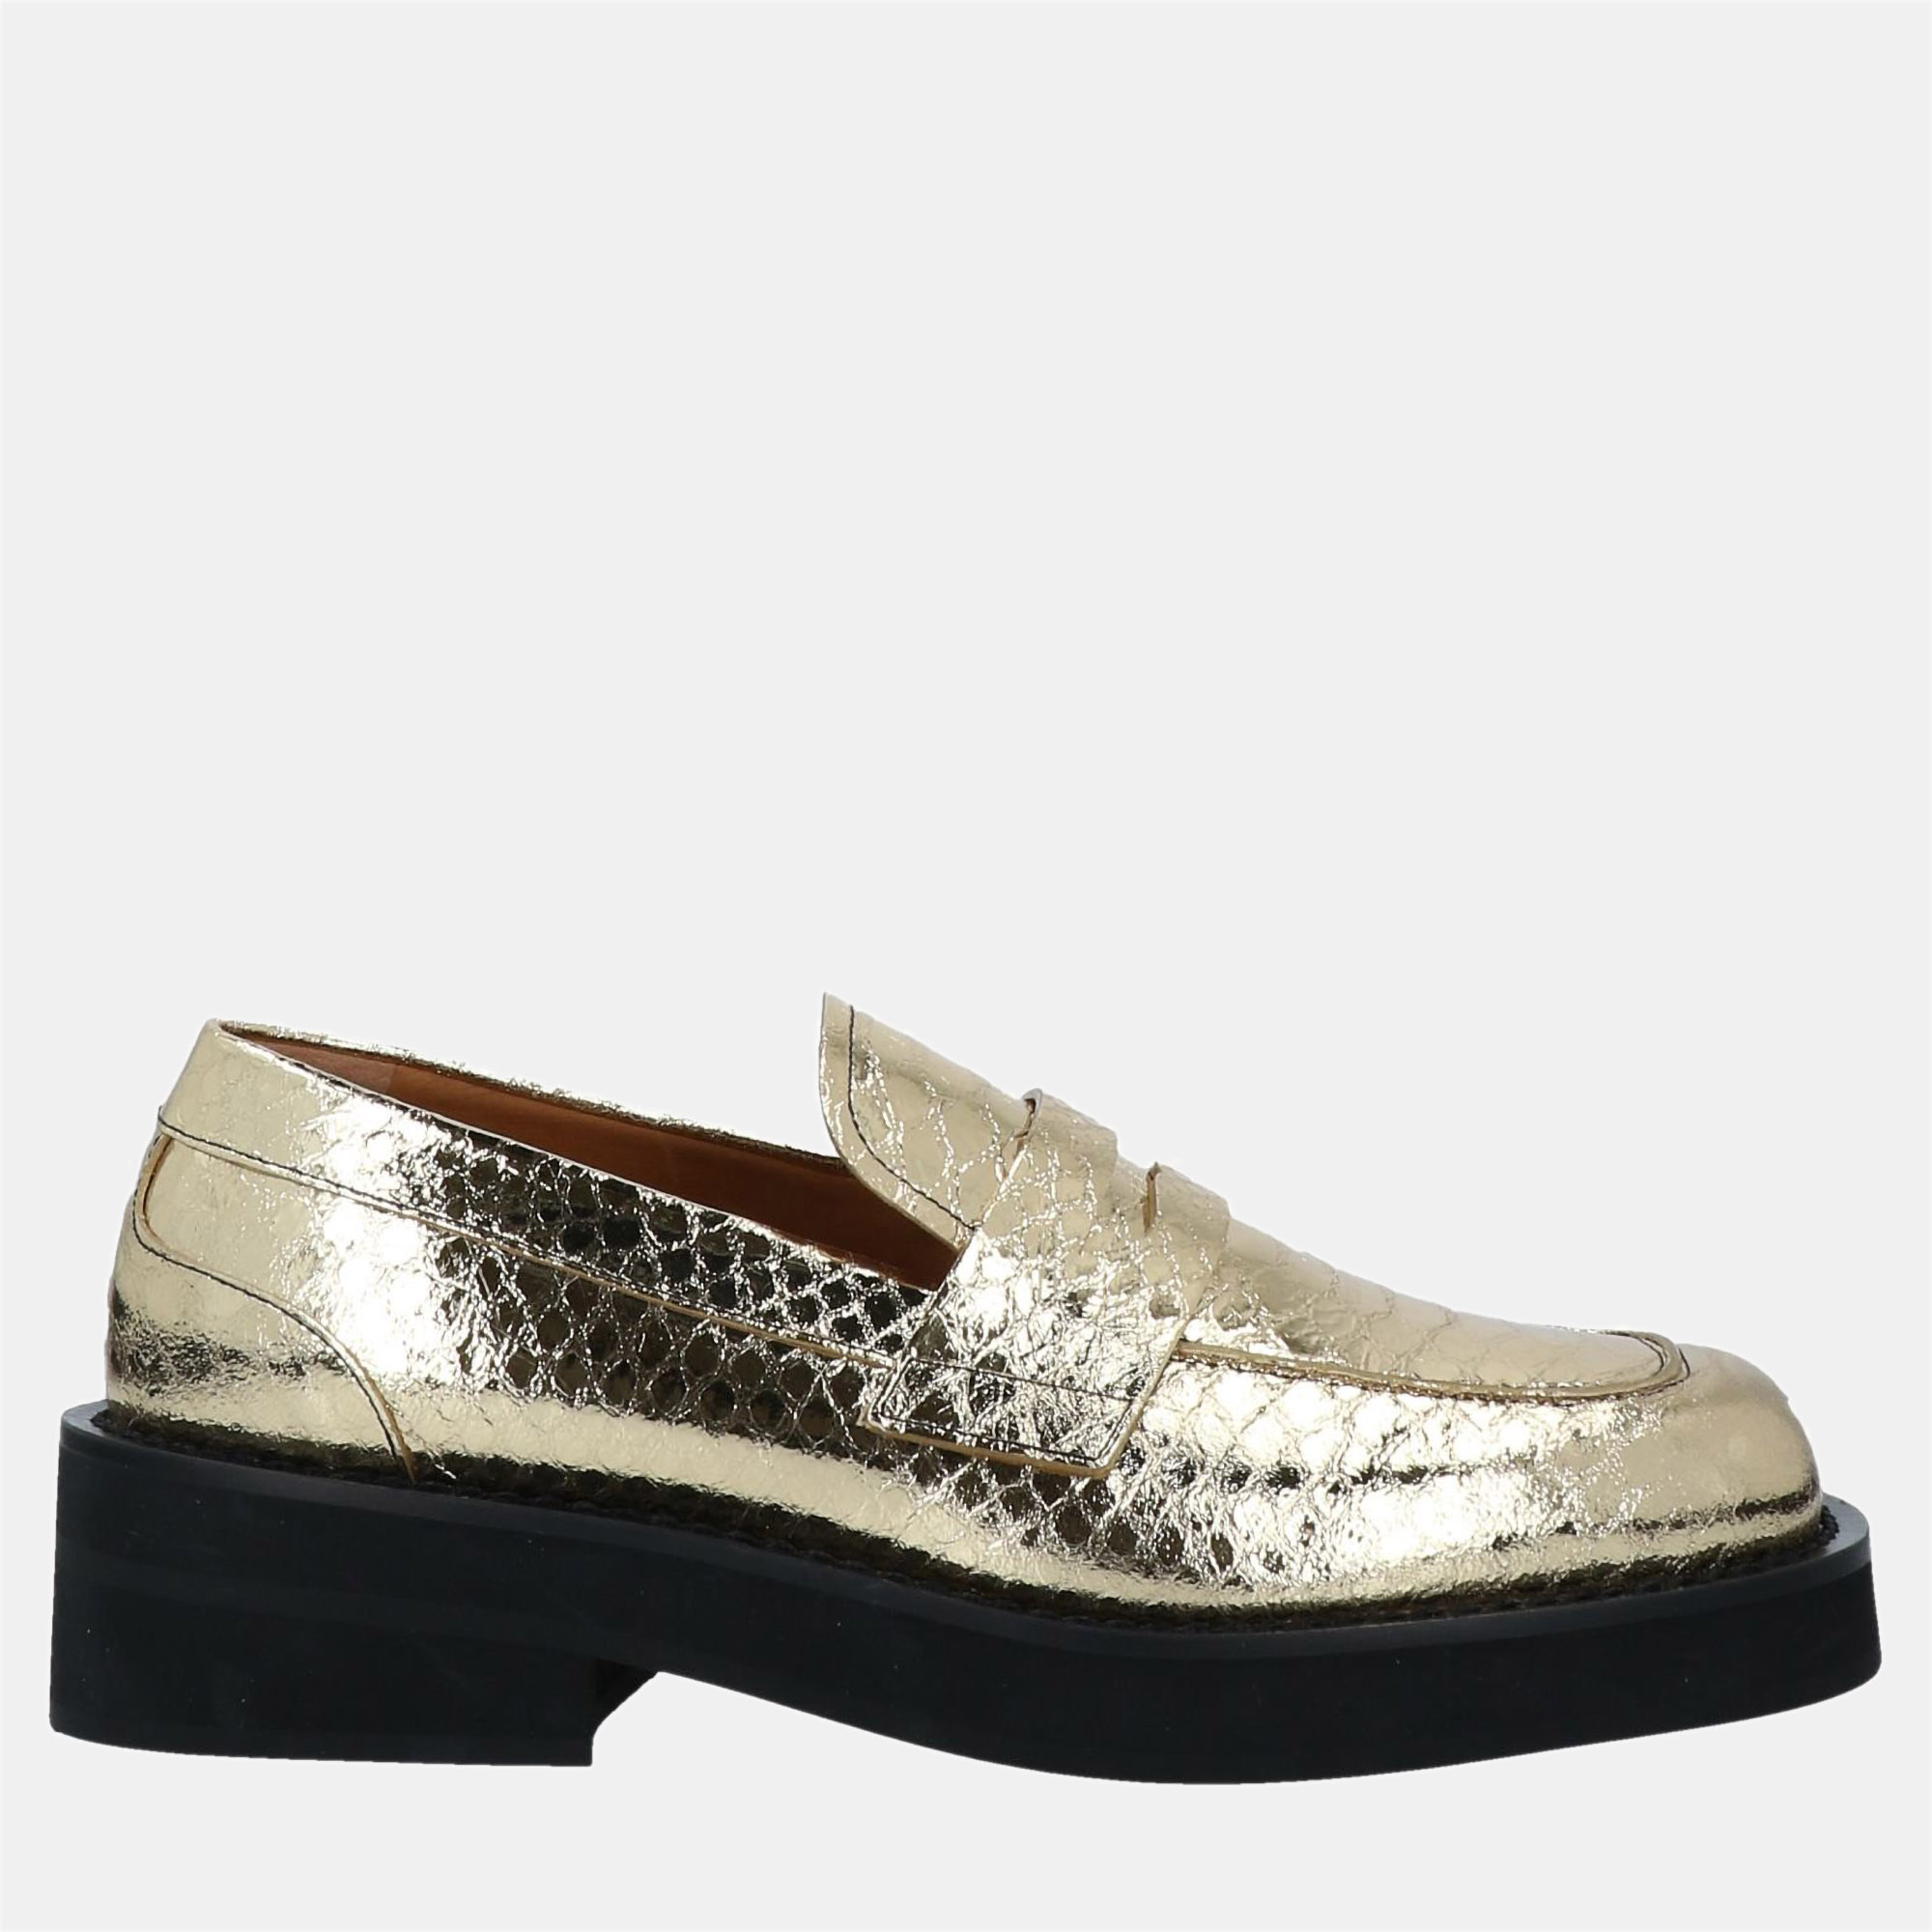 Pre-owned Marni Gold Snakeskin Embossed Leather Loafers Size 35